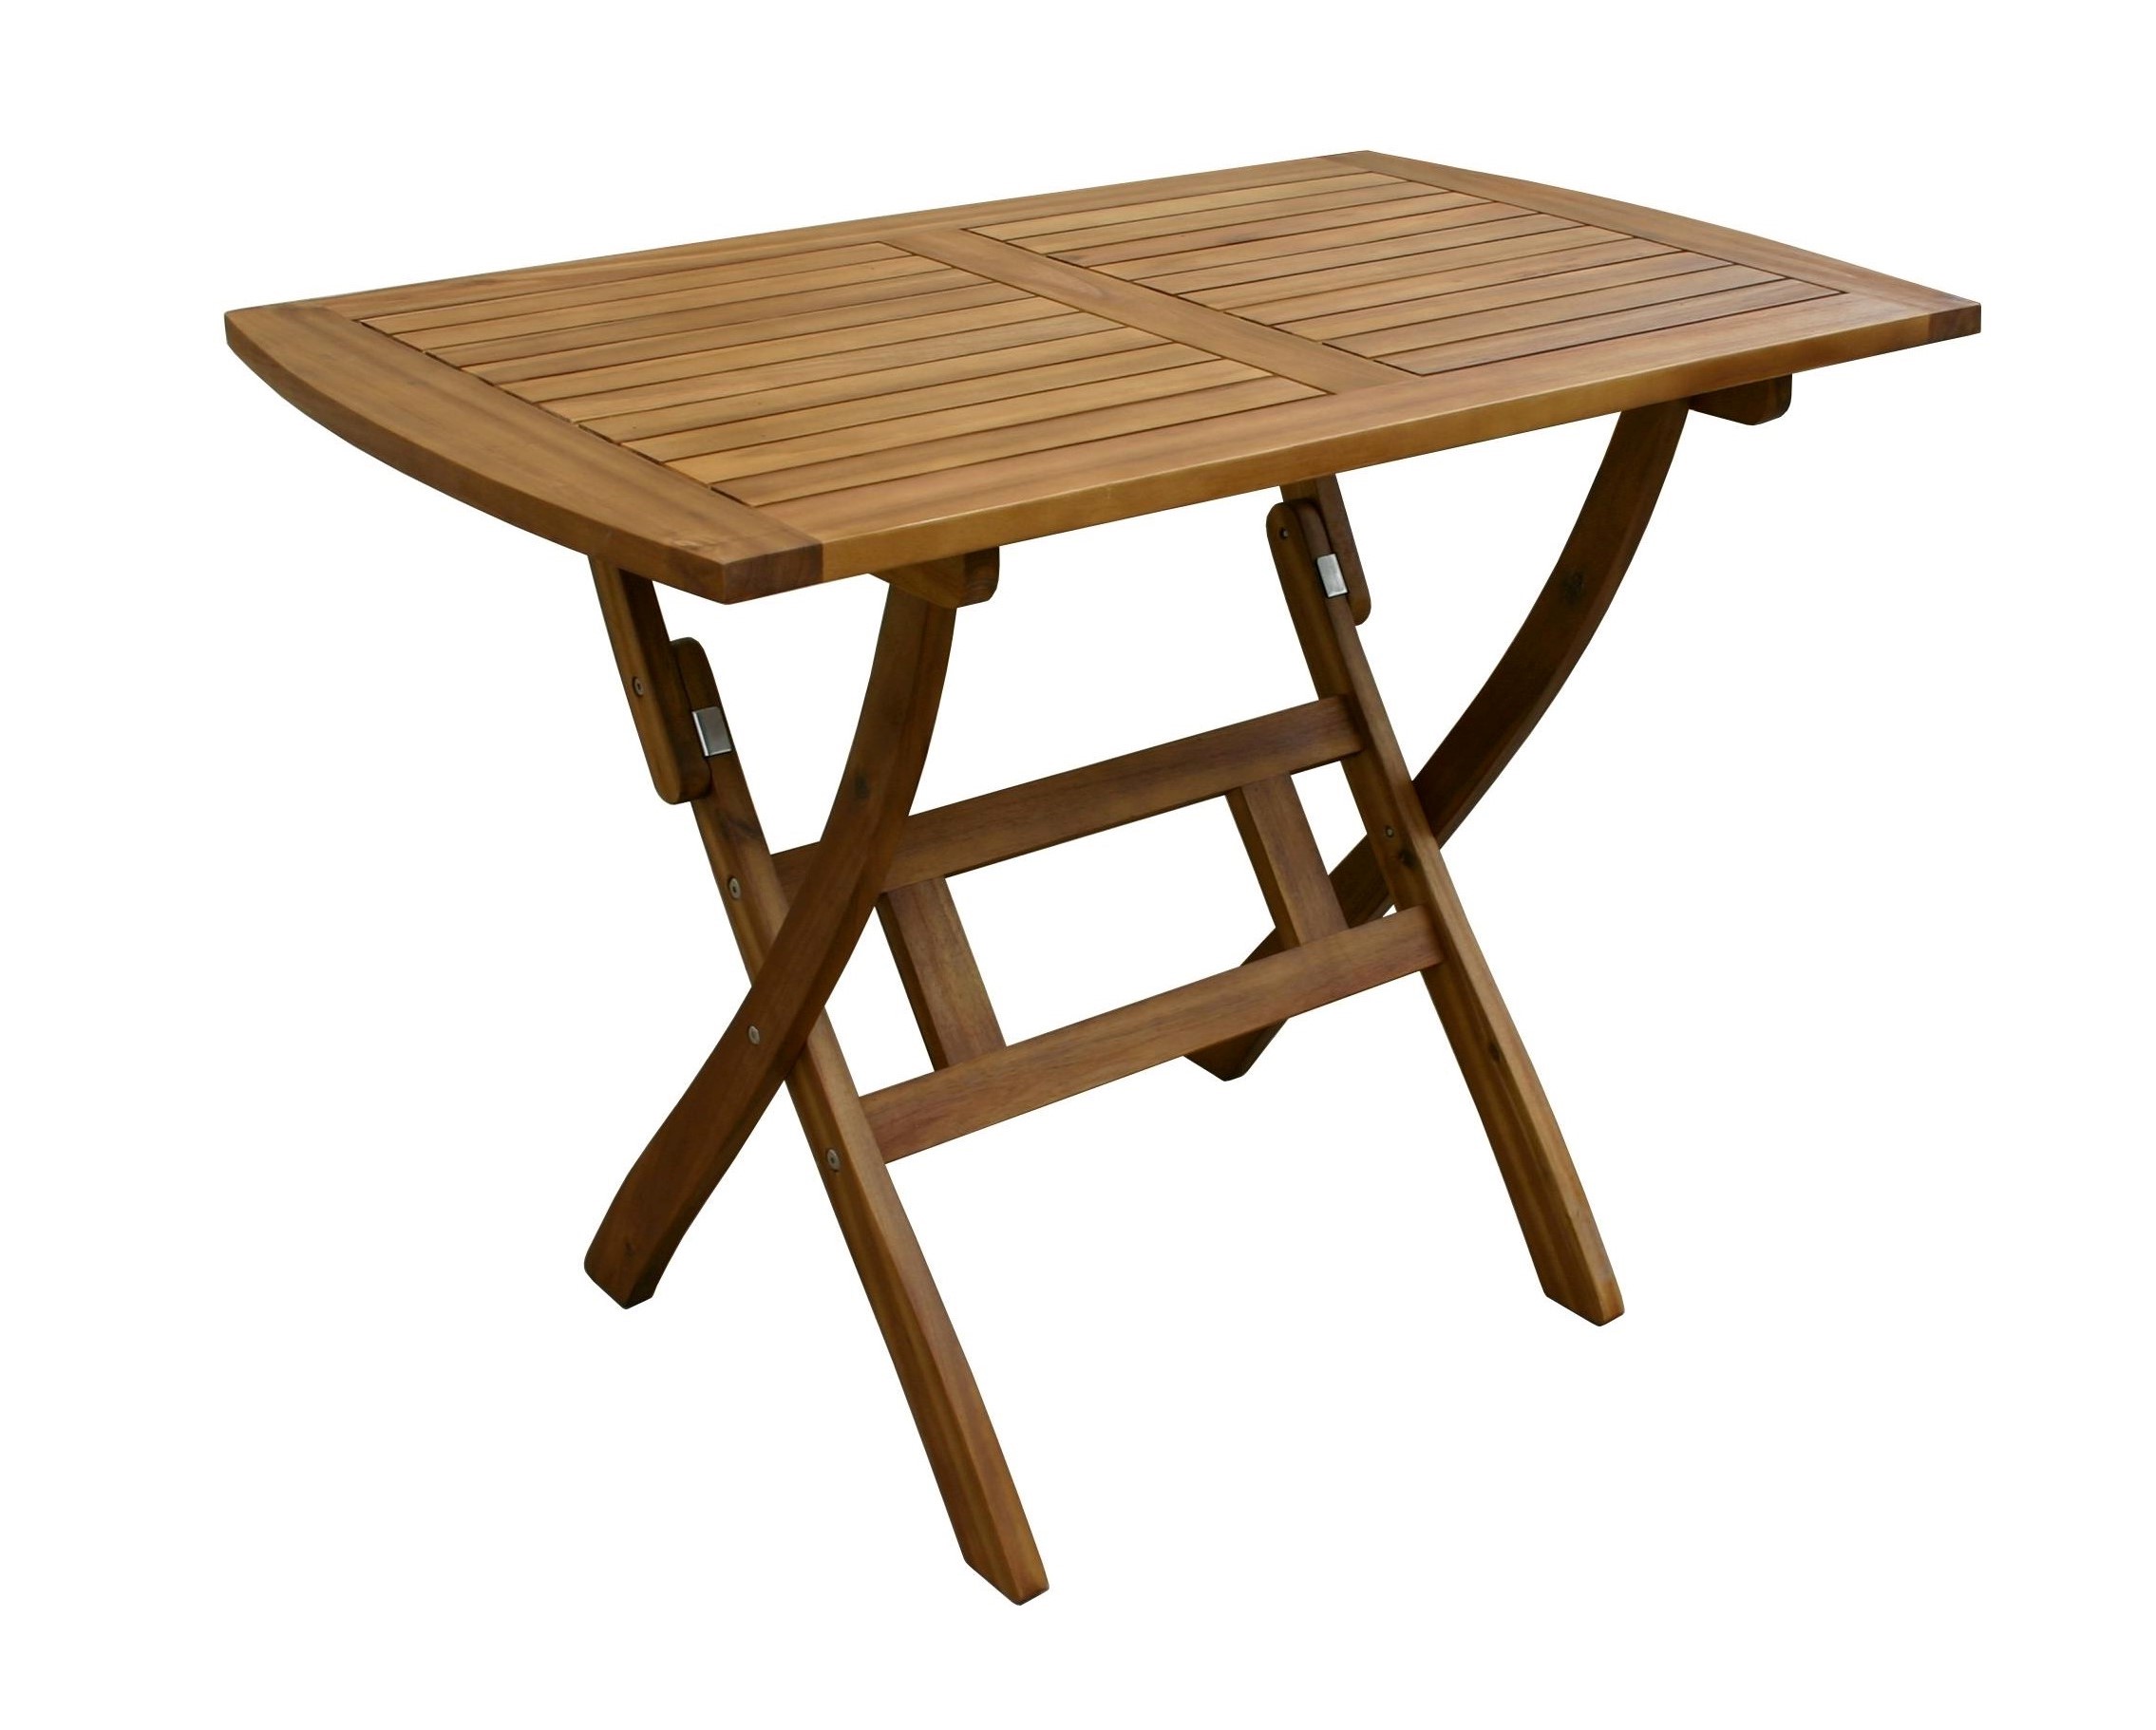 RECT.TABLE WOODEN 100CMX60CM